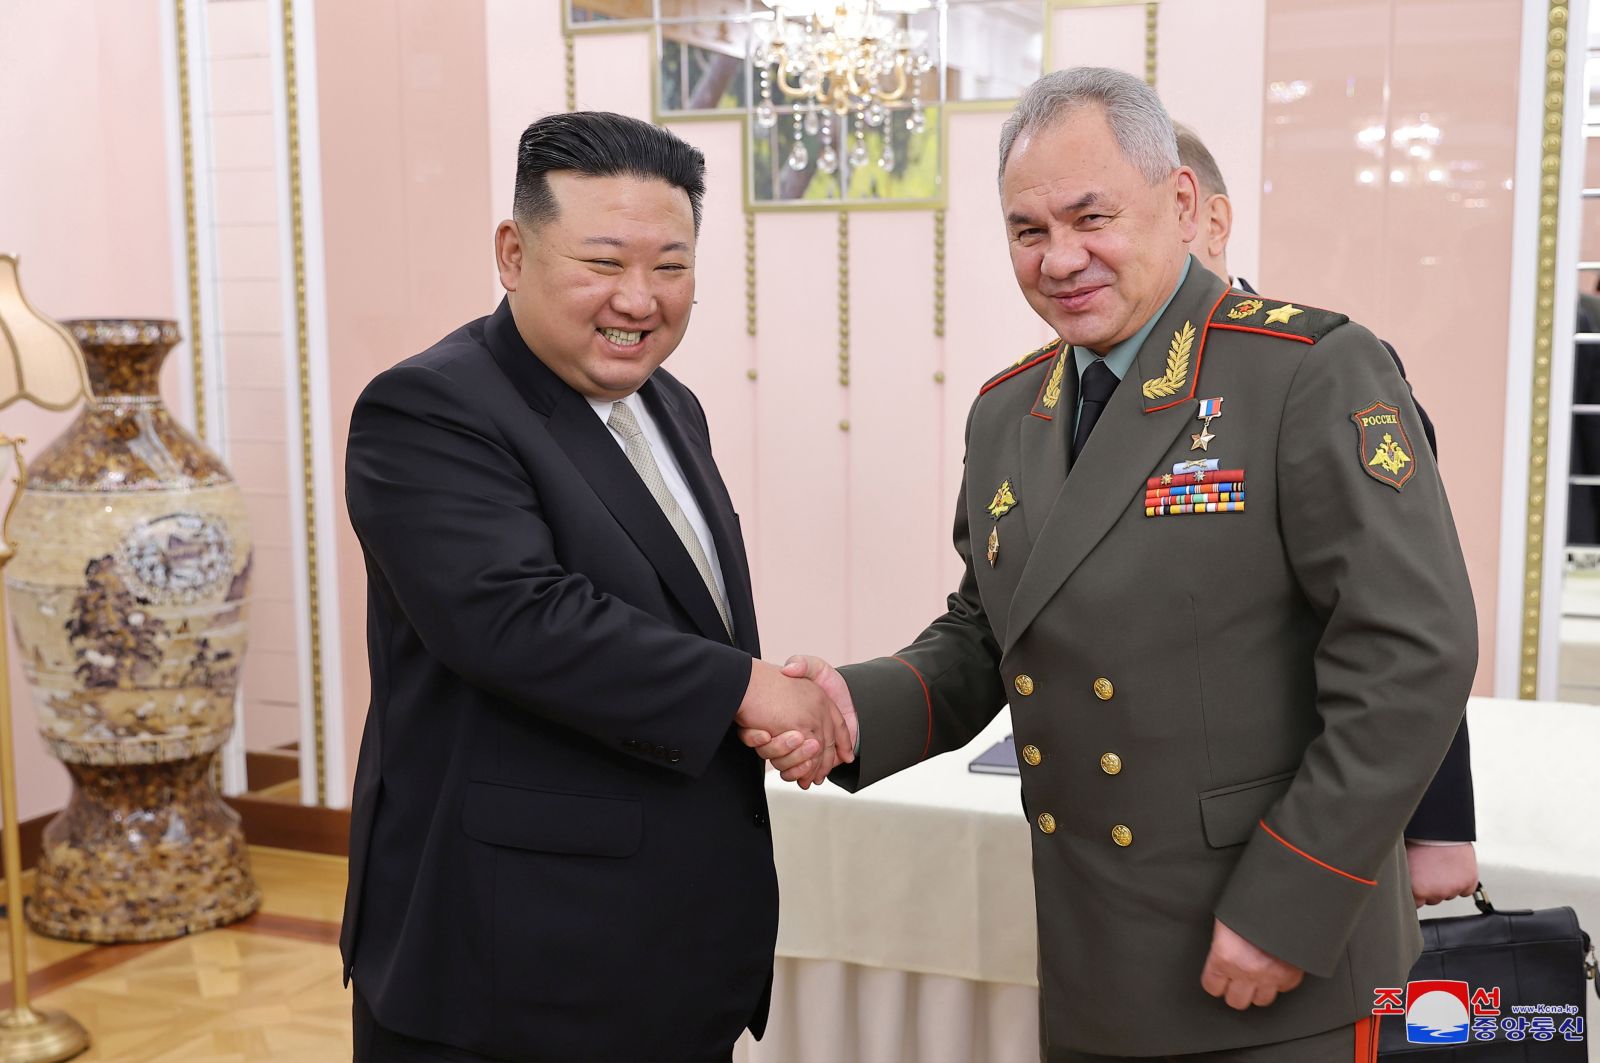 epa10770768 A photo released by the official North Korean Central News Agency (KCNA) shows North Korean Supreme Leader Kim Jong-un (L) shaking hands with Minister of Defense of the Russian Federation Sergei Shoigu (R) during a meeting at the office building of the Party Central Committee in Pyongyang, North Korea, 26 July 2023 (issued 27 July 2023). Shoigu is on a visit to North Korea coinciding with the nation's celebration of the armistice that ceased direct conflict in the 1950-53 Korean War.  EPA/KCNA   EDITORIAL USE ONLY